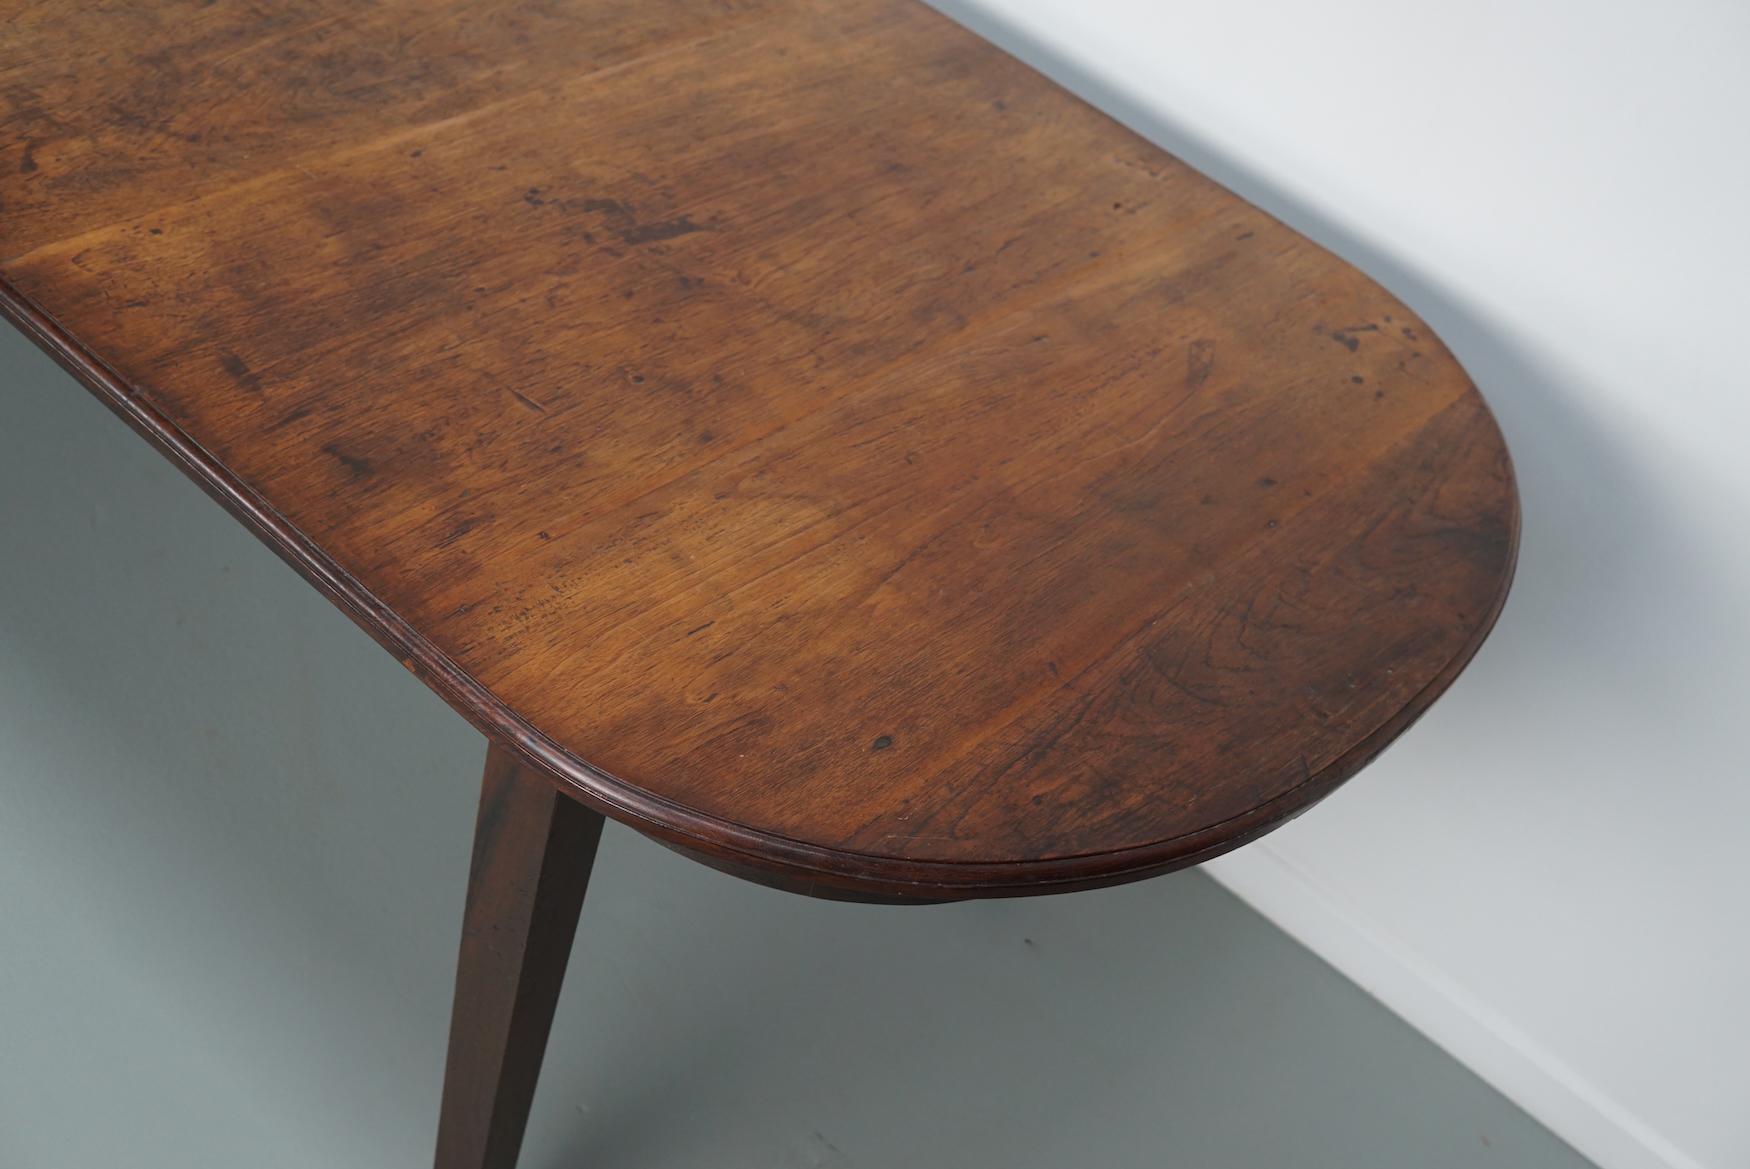 This elegant table was made in the Netherlands / Indonesia in the mid 20th century. It has a tabletop made from large pieces of antique school tables. The table was made in solid Indonesian teak with a beautiful grain pattern. It has a warm color